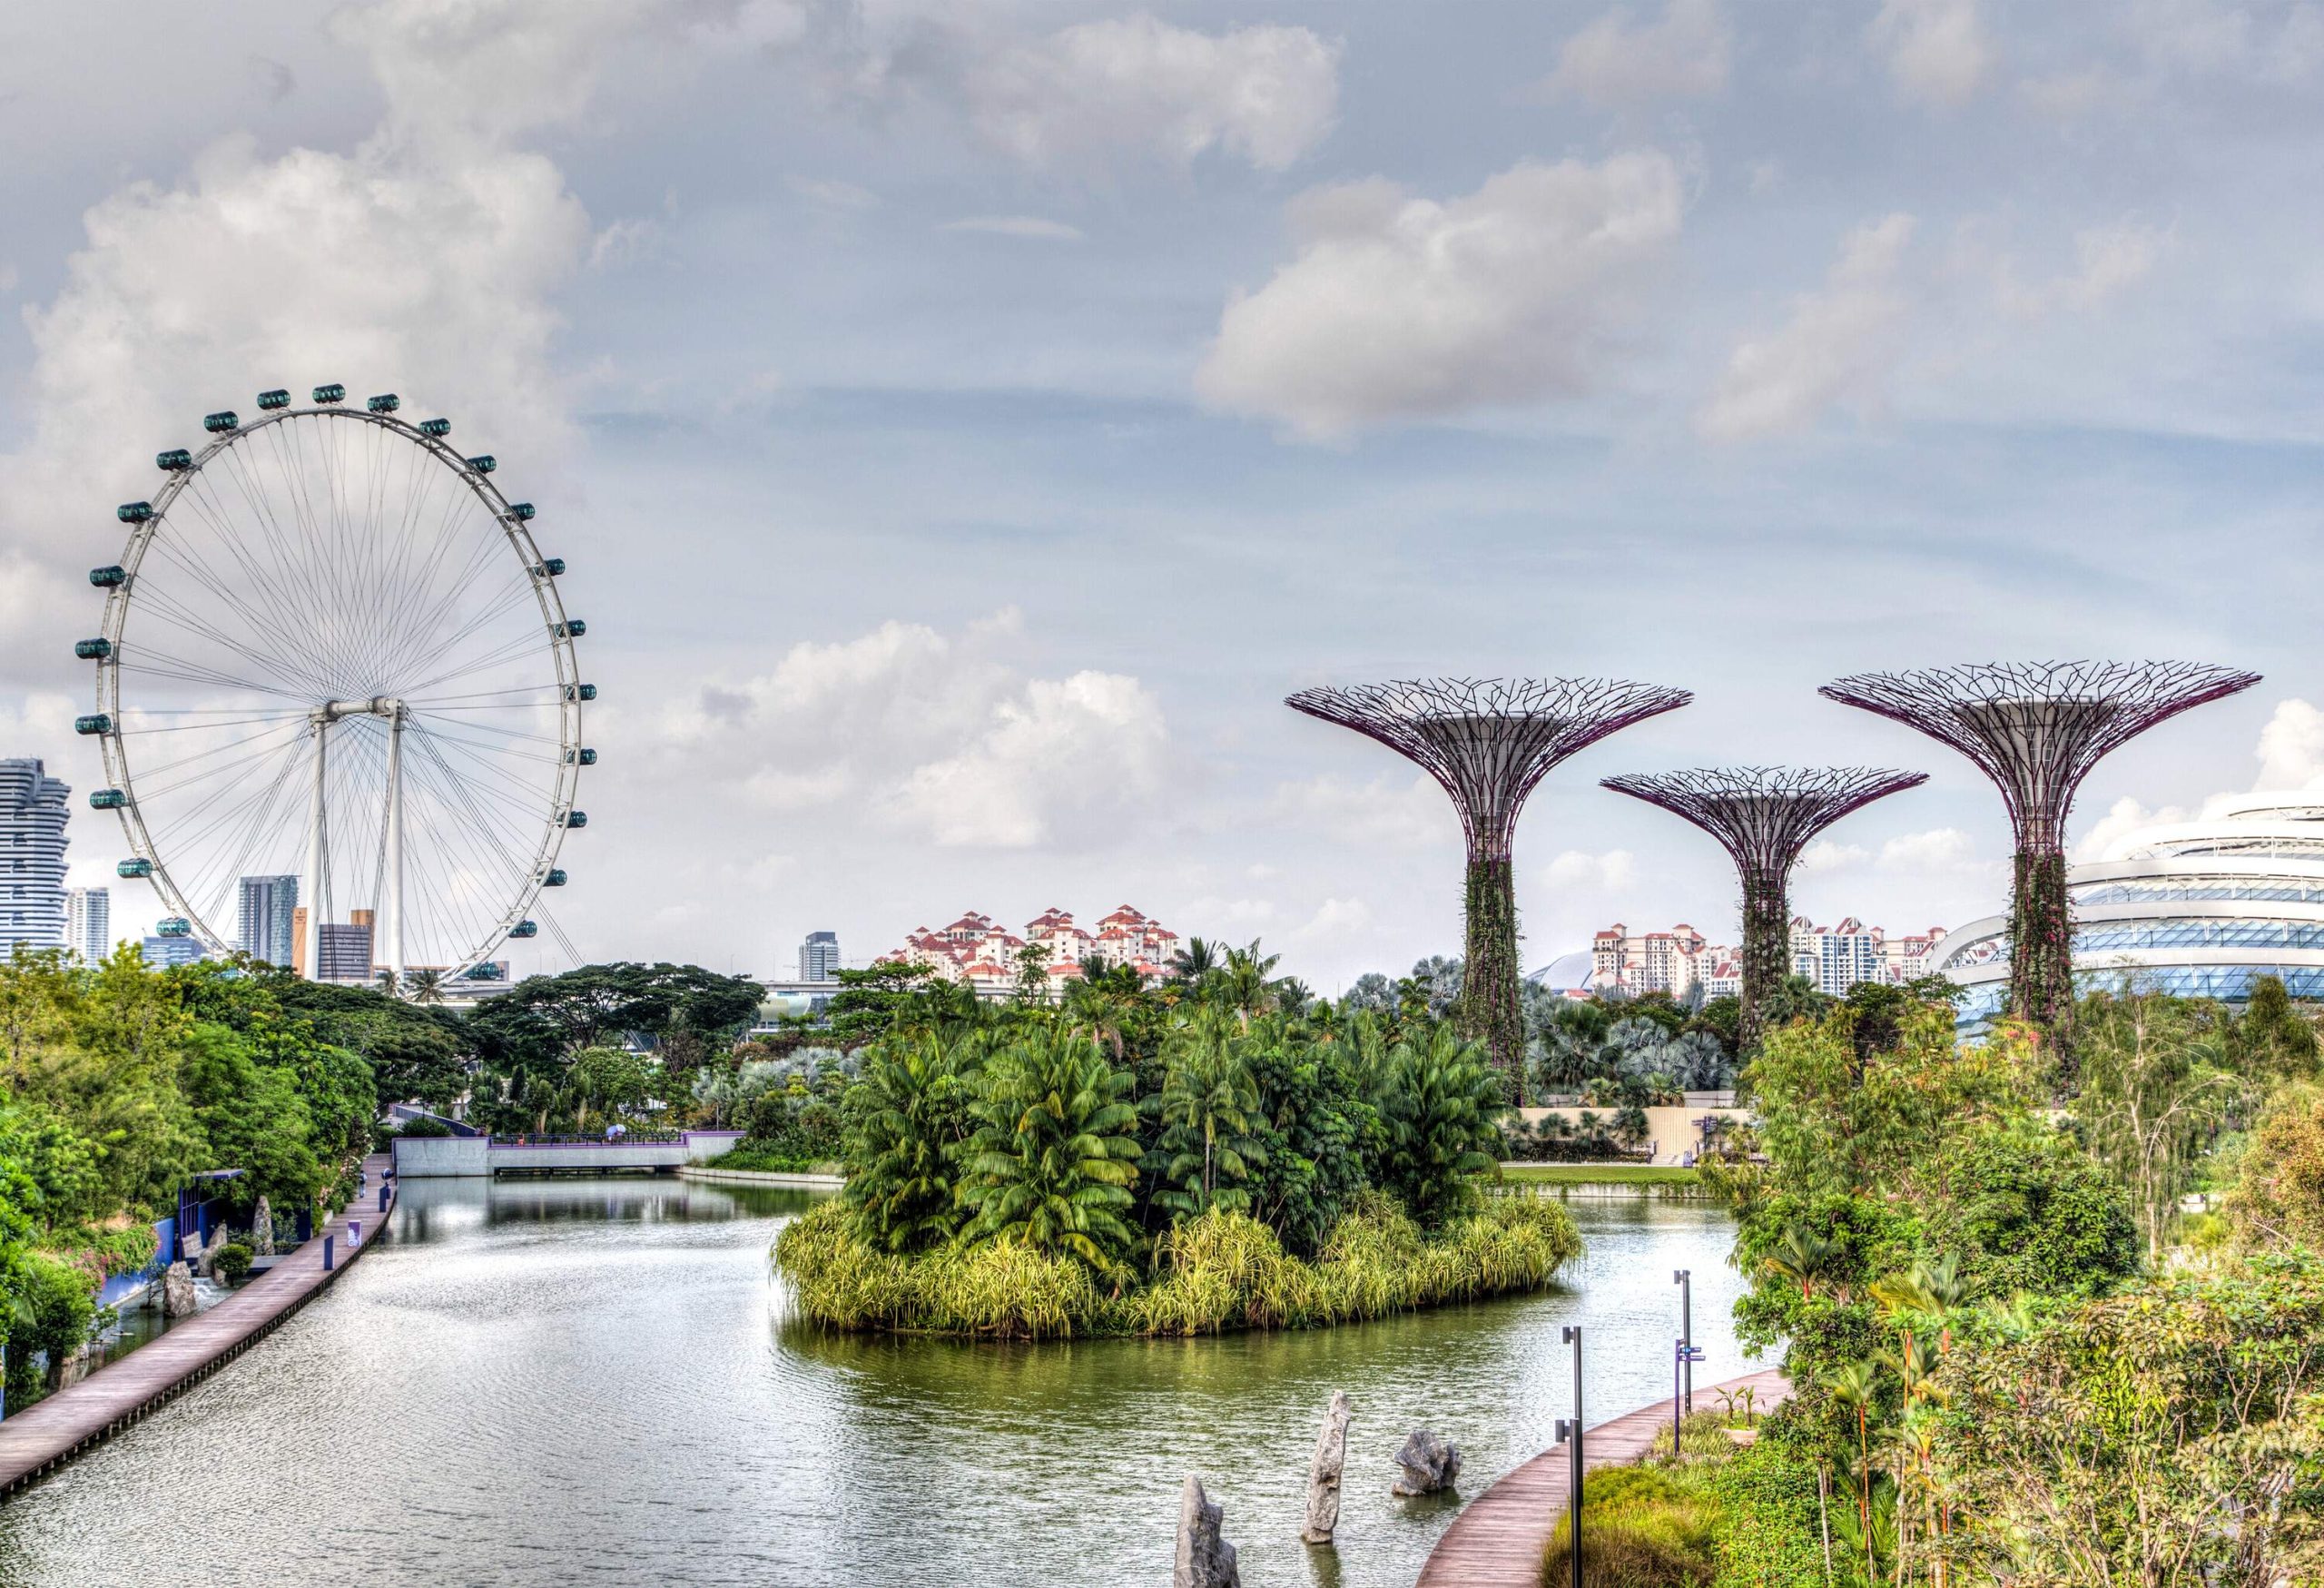 A Ferris wheel and a man-made vertical garden shaped like trees adorning the skyline by the bay.